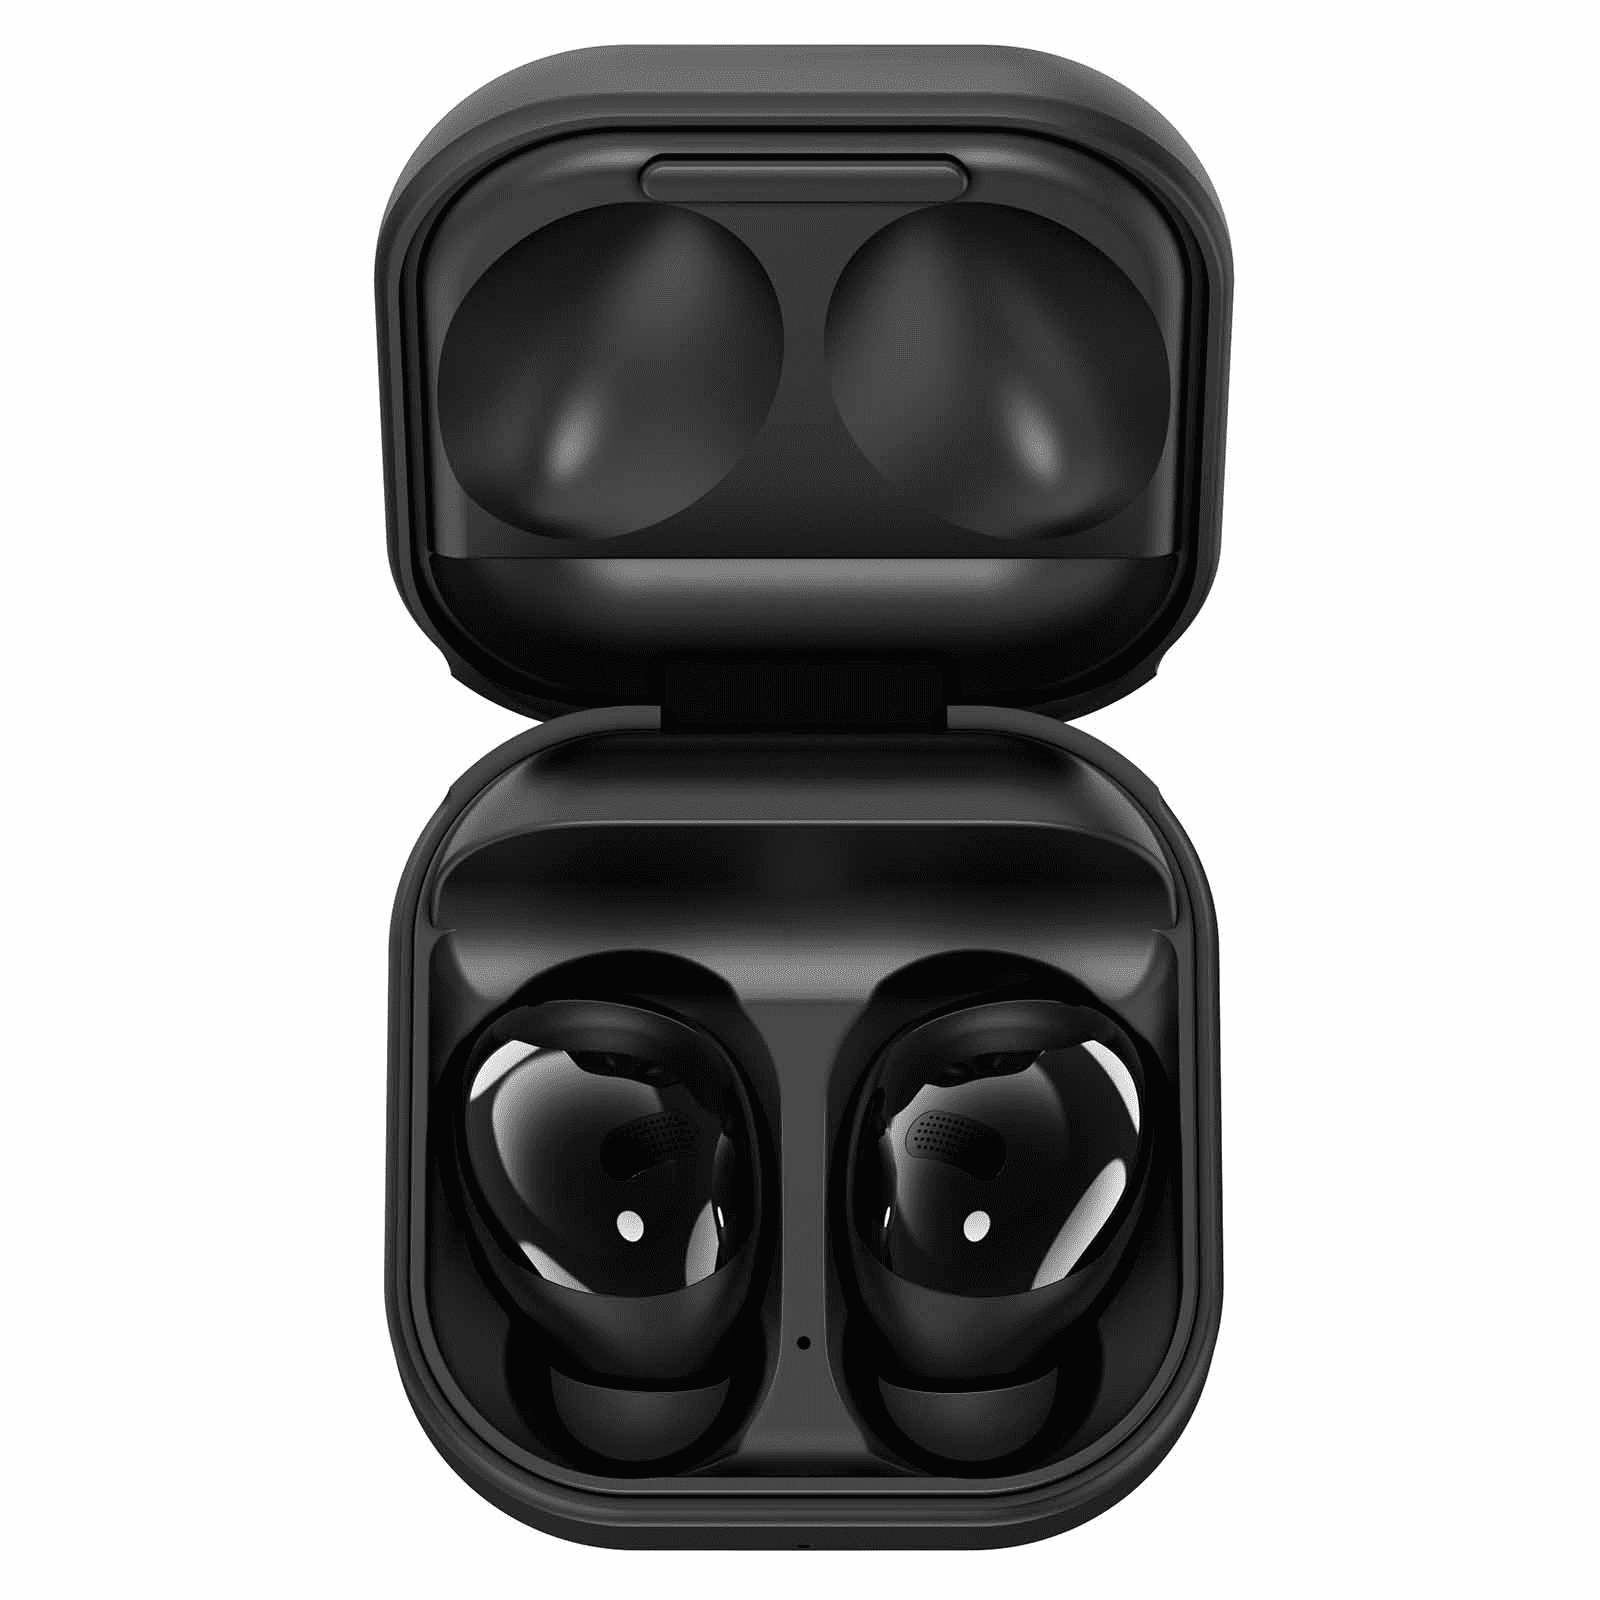 UrbanX Street Buds Pro True Bluetooth Wireless Earbuds For Lava V2 s With Active Noise Cancelling (Wireless Charging Case Included) Black